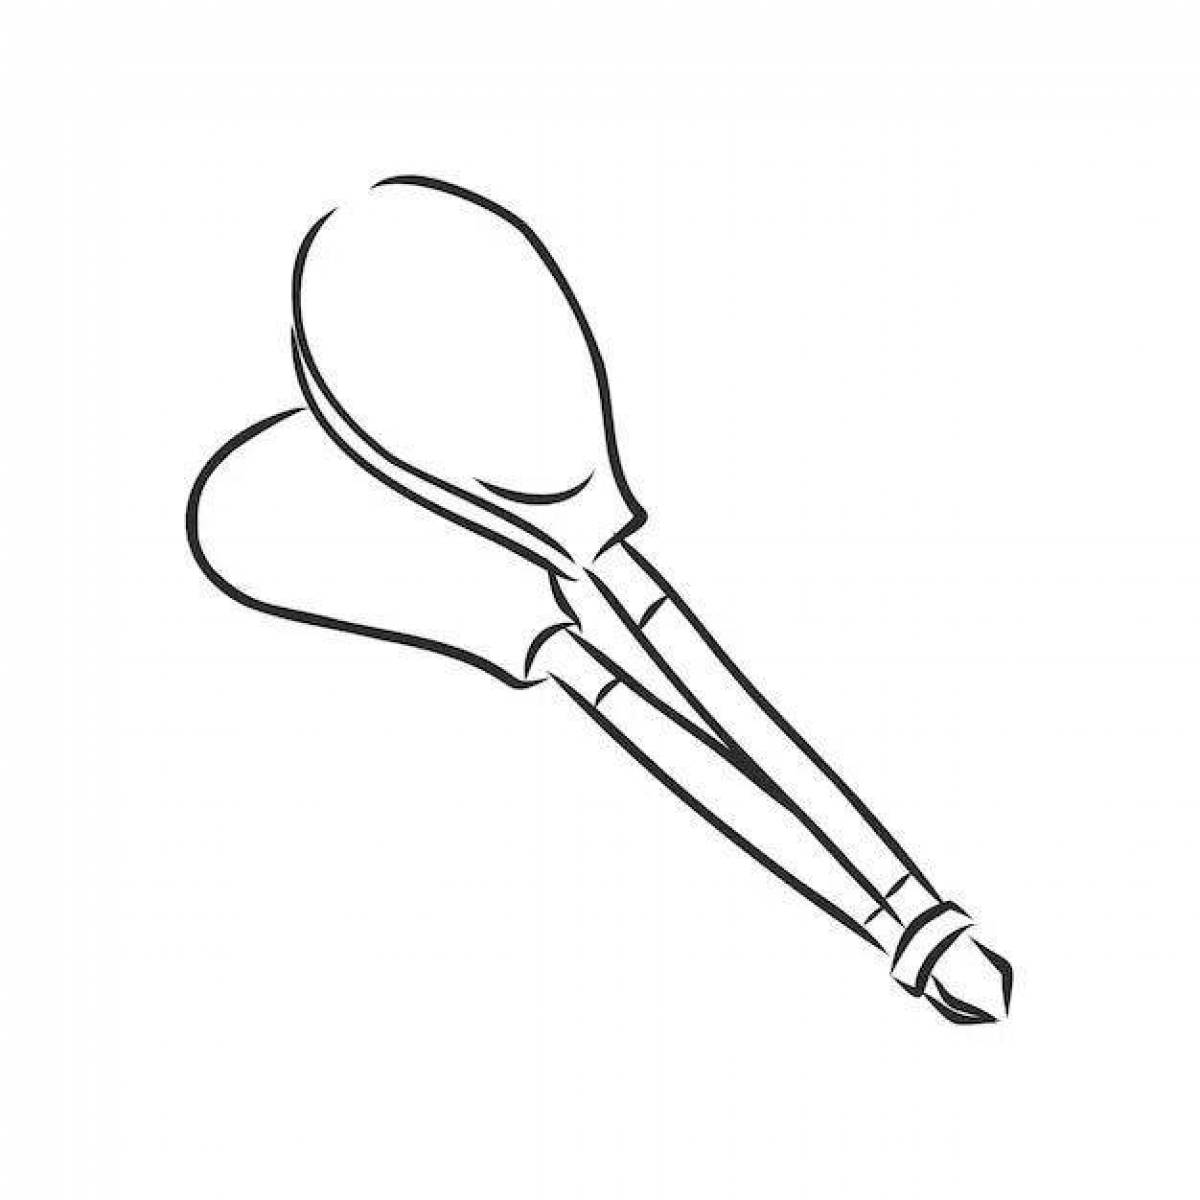 Coloring page adorable musical instrument spoon